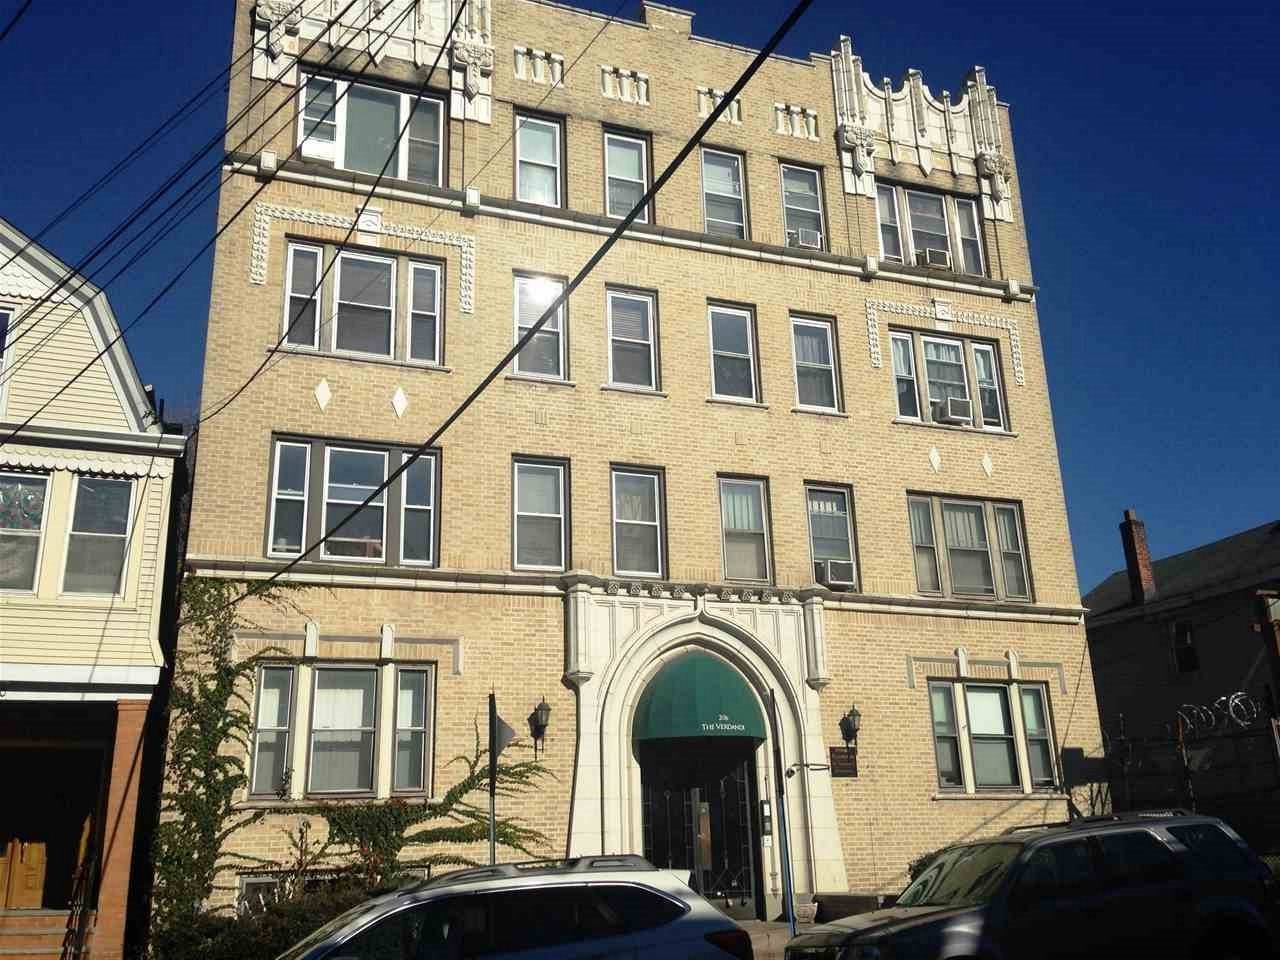 Large 2 BR convenient to Kennedy Blvd - 2 BR New Jersey